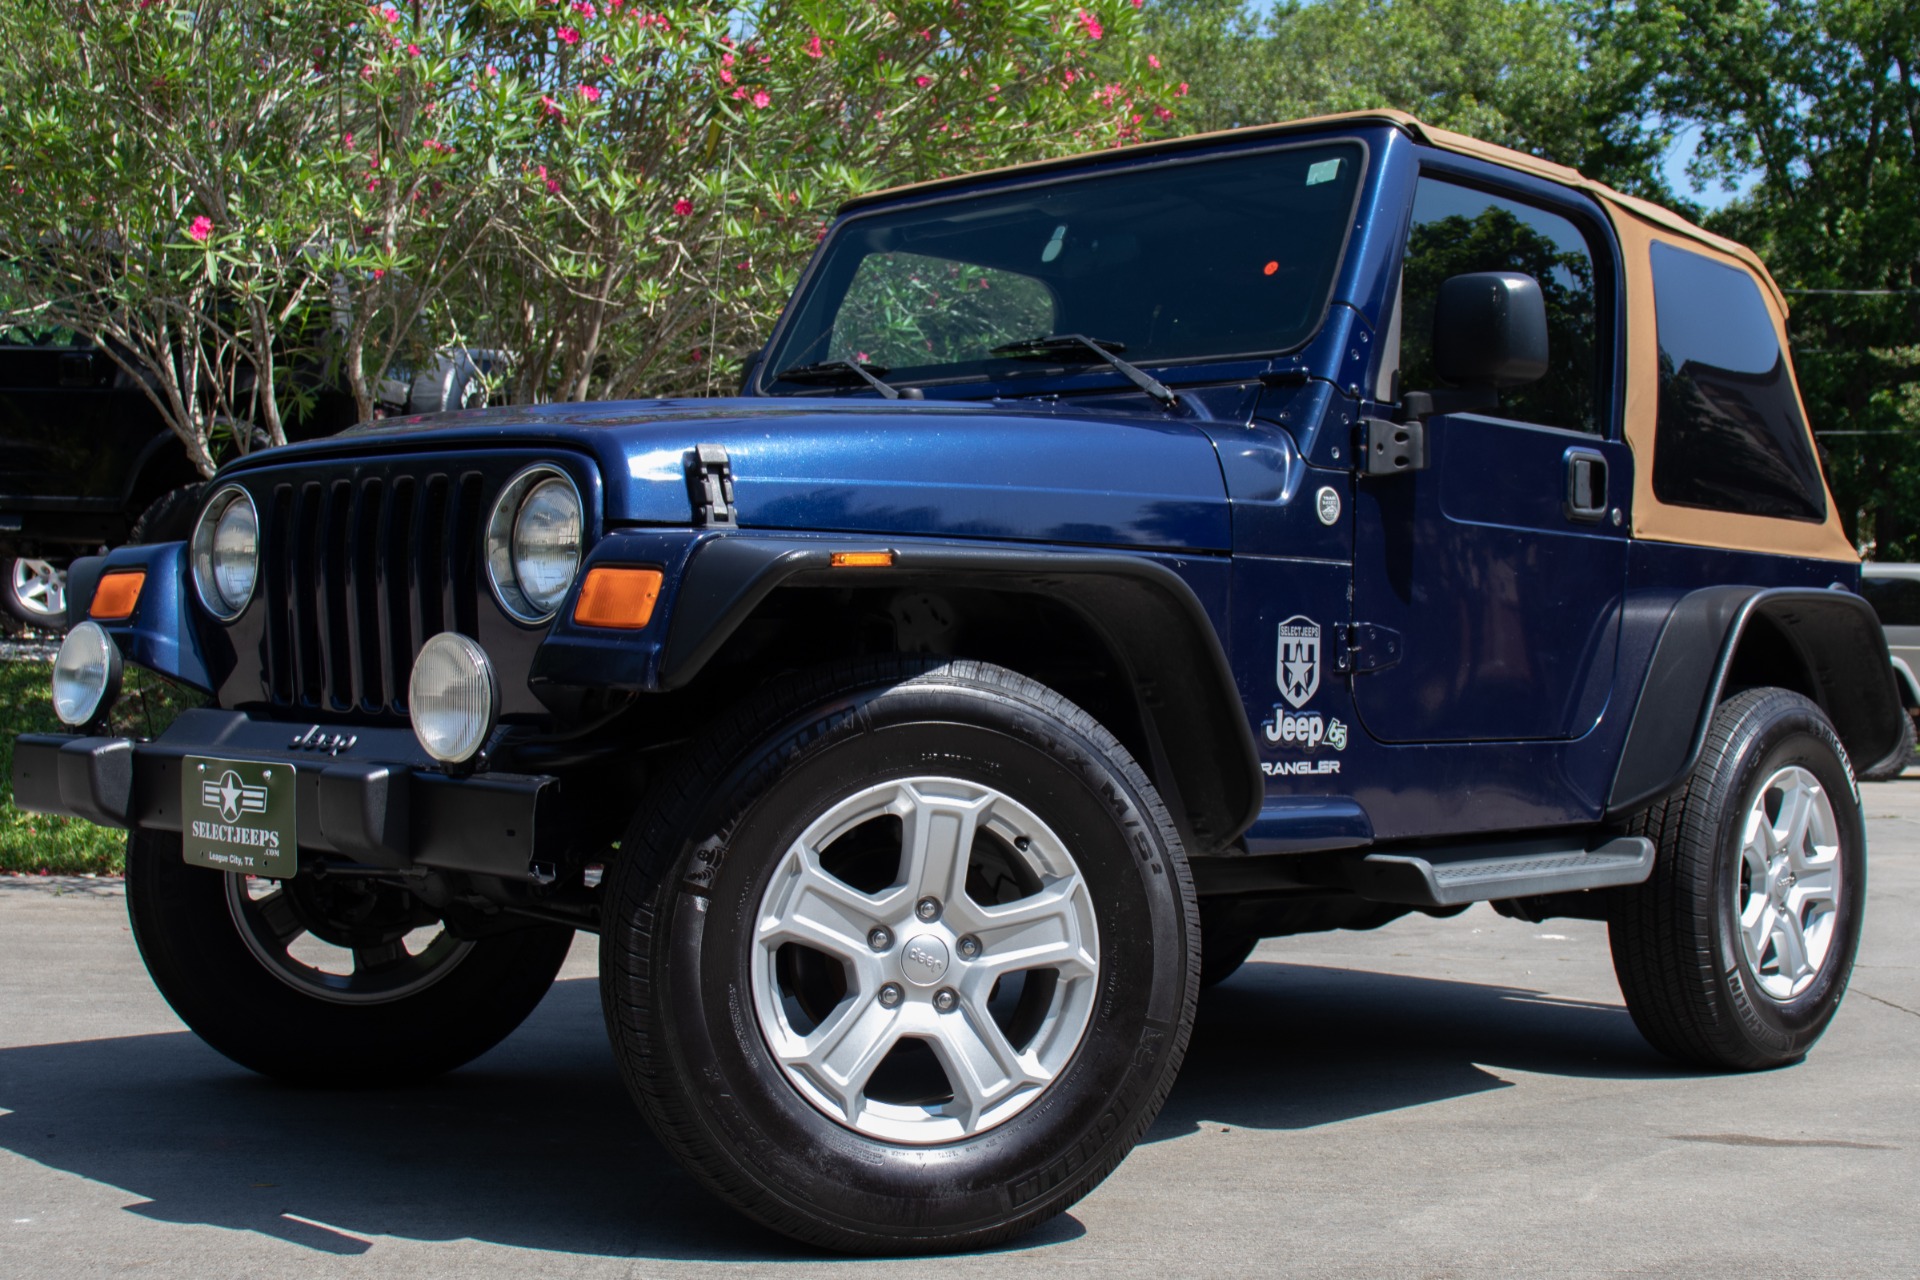 Used 2006 Jeep Wrangler X For Sale ($13,995) | Select Jeeps Inc. Stock  #753576